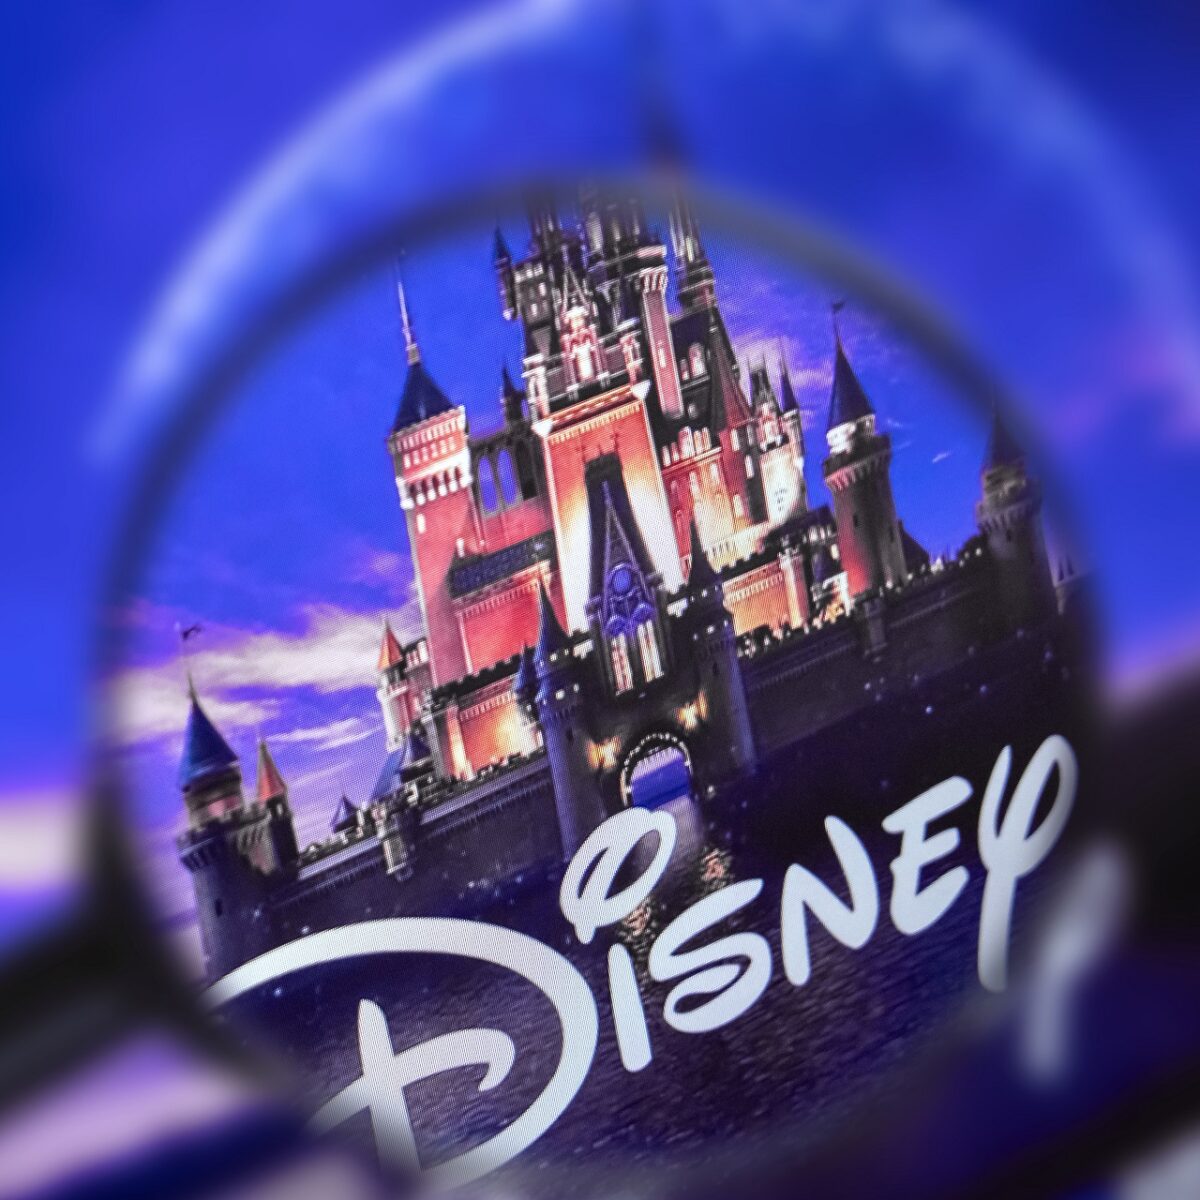 is there a disney plus app for xbox one